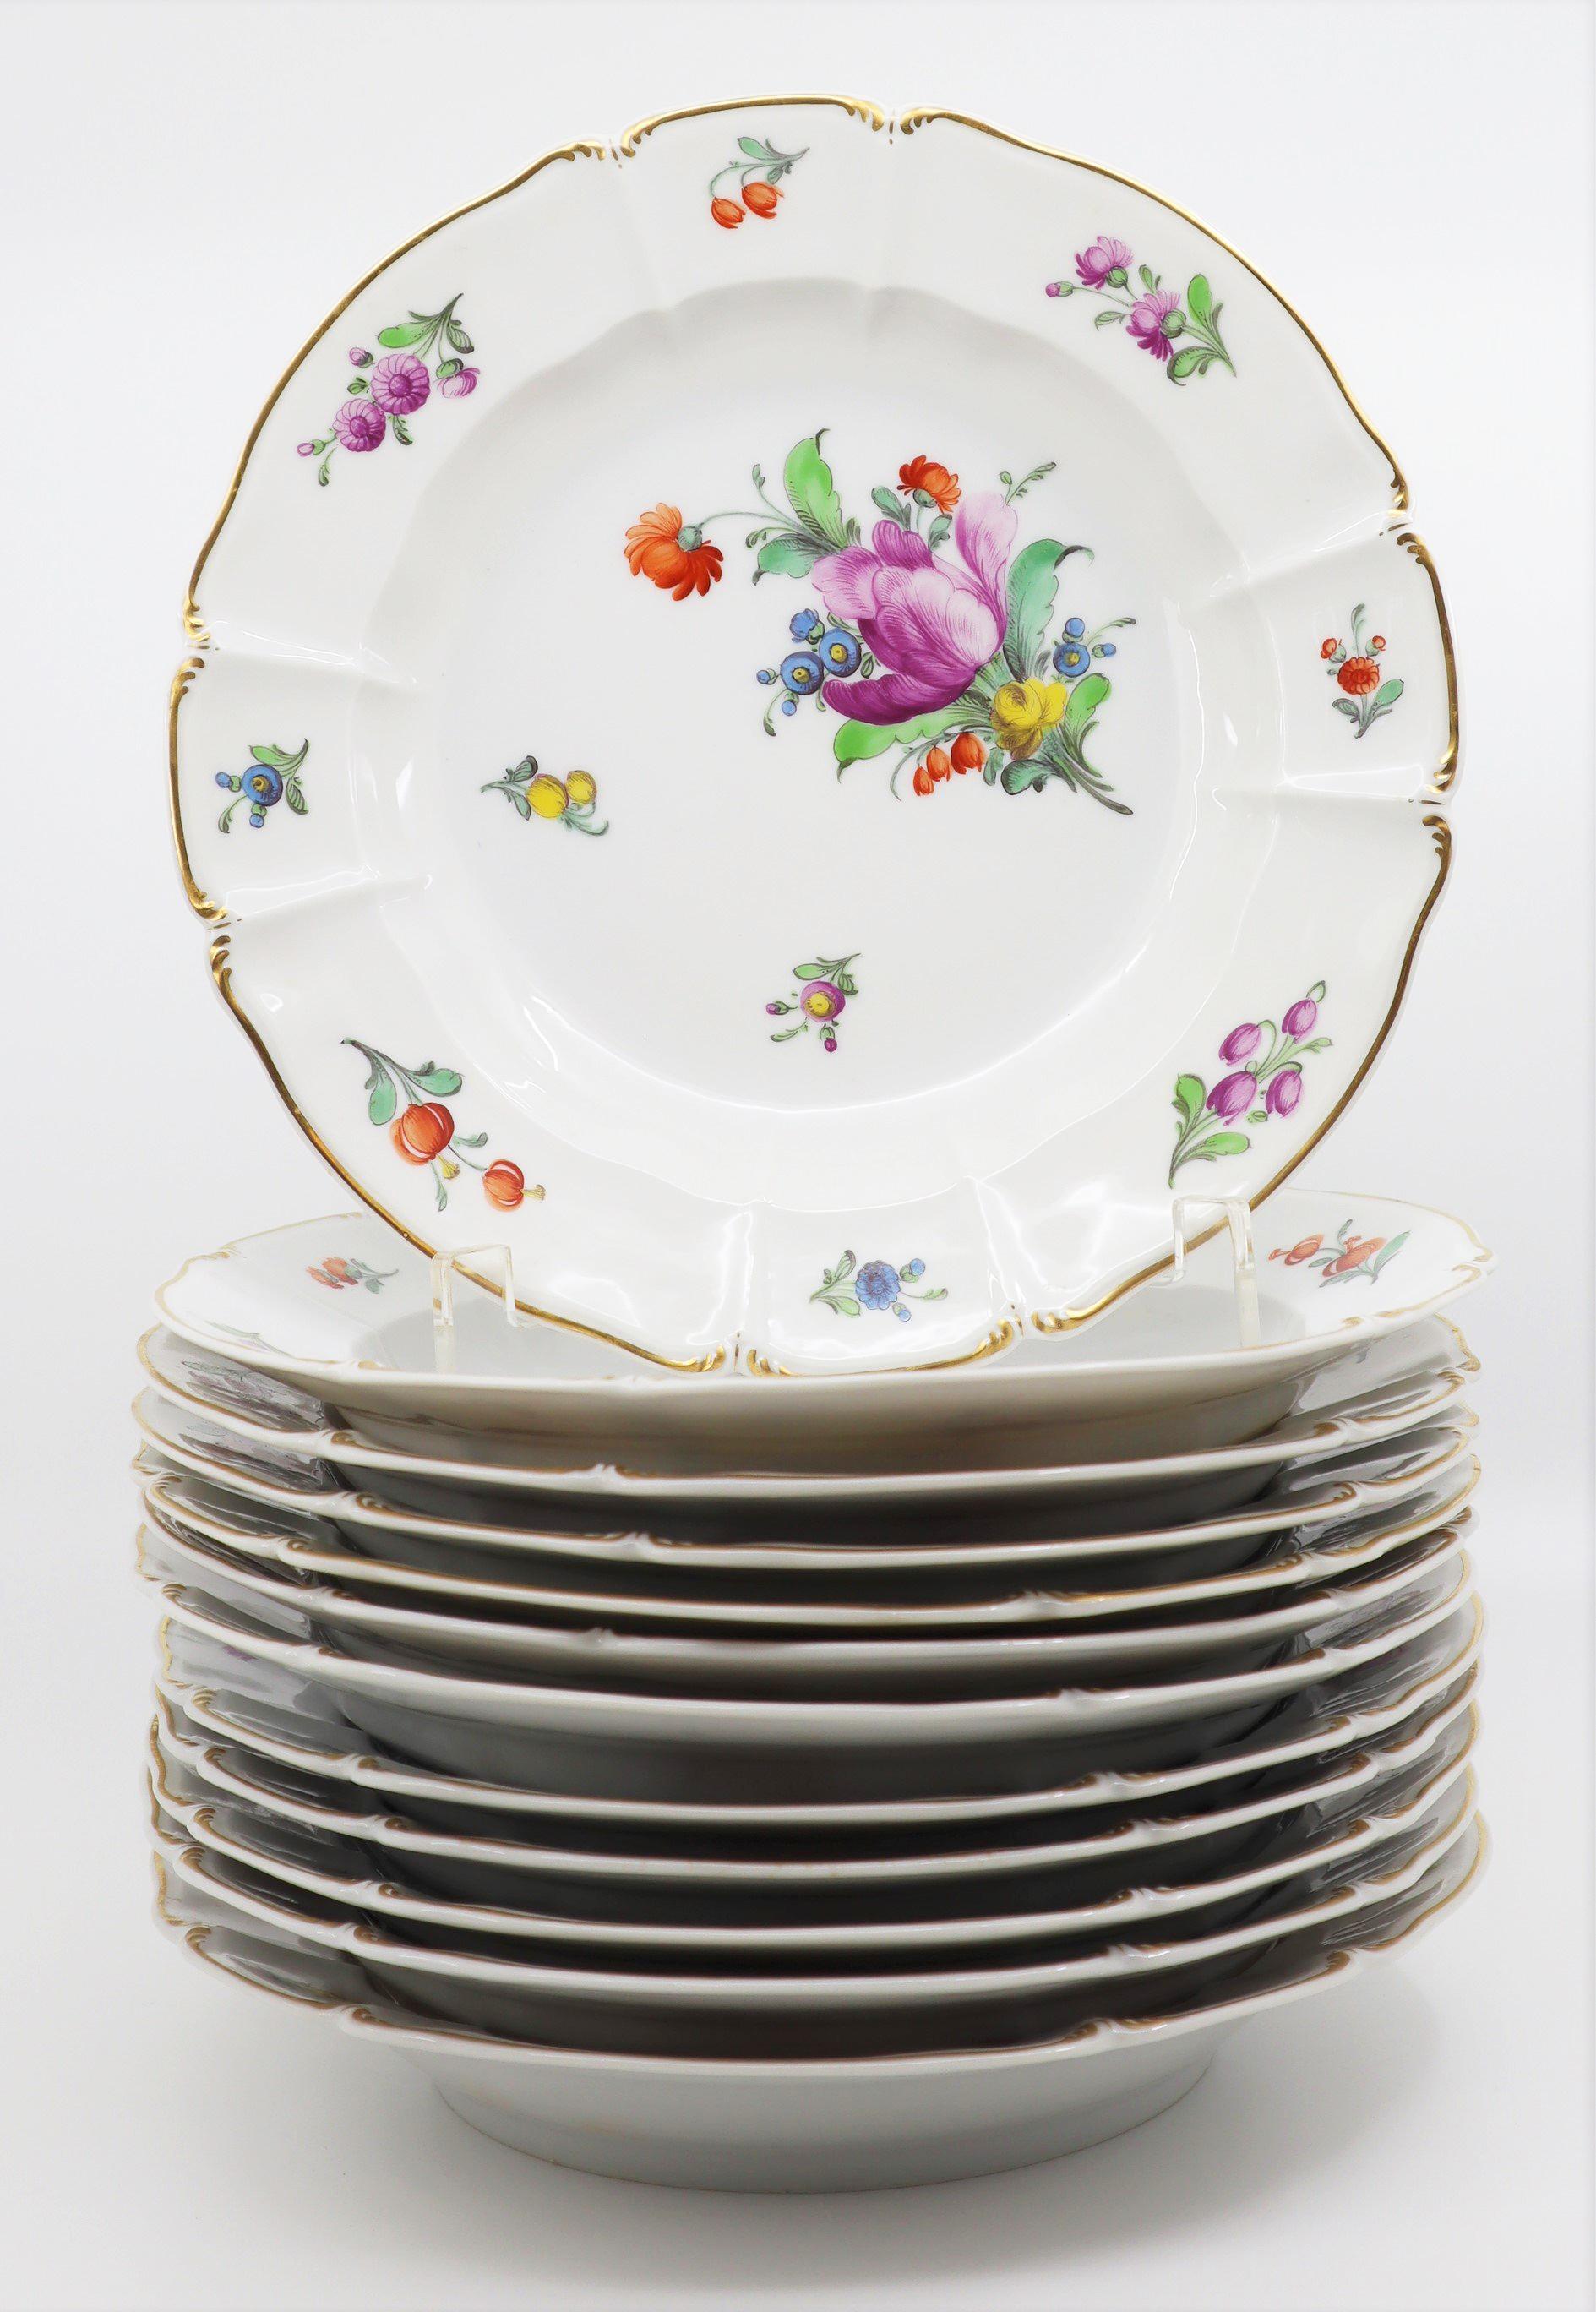 Dinner Service, 19th Century Porcelain, German, Hand Painted with Flowers Décor 9